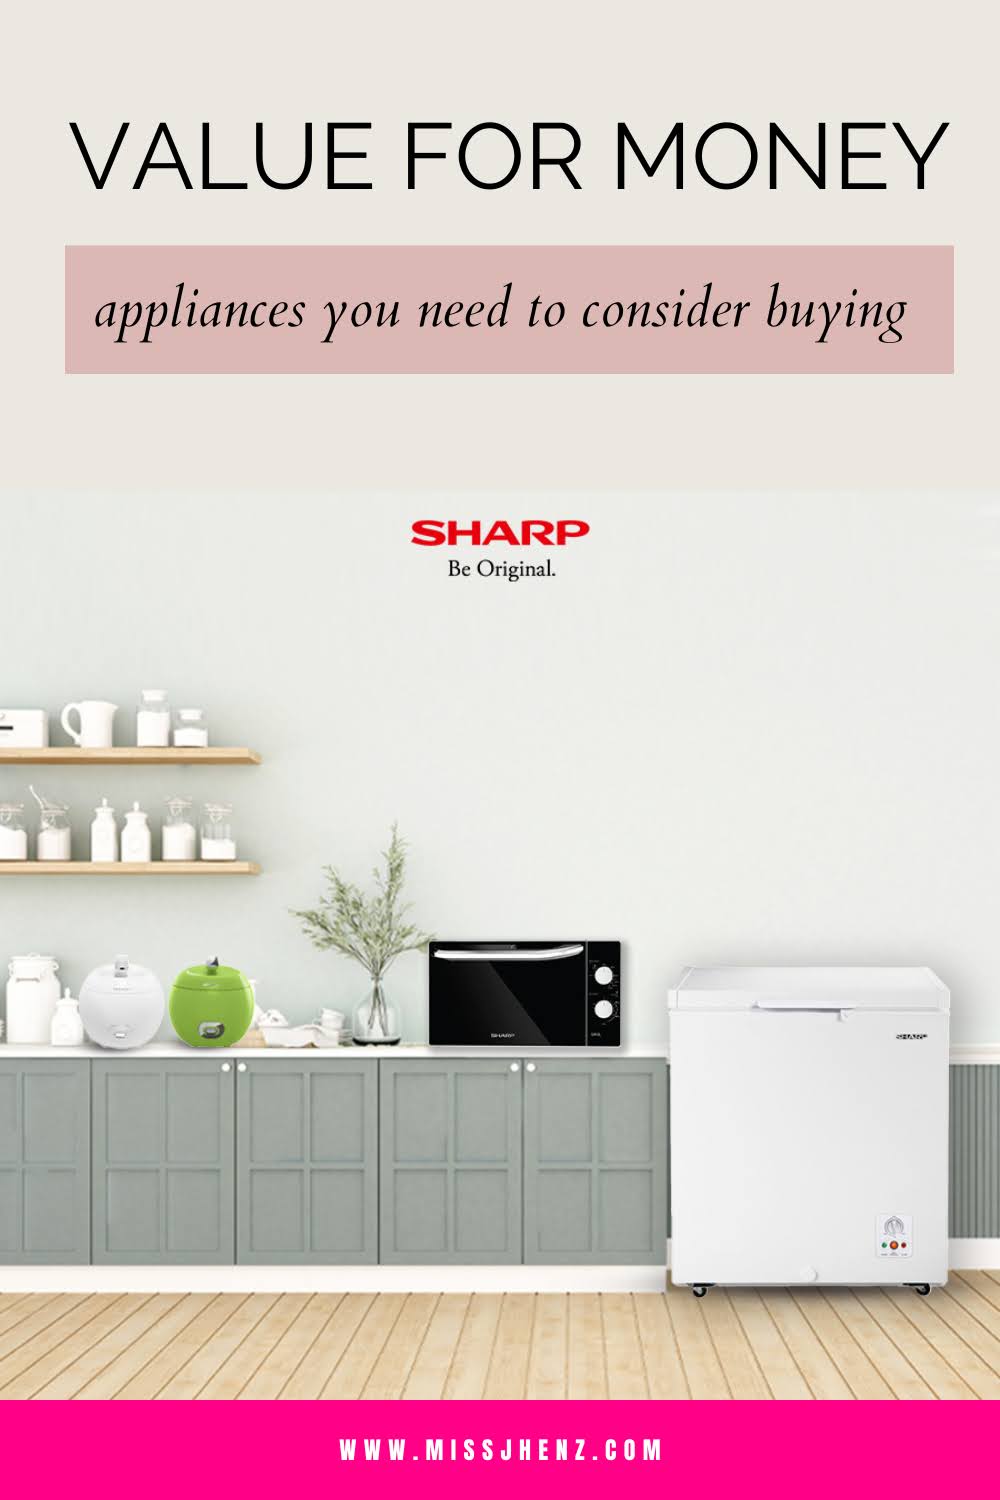 Value for money appliances you need to consider buying